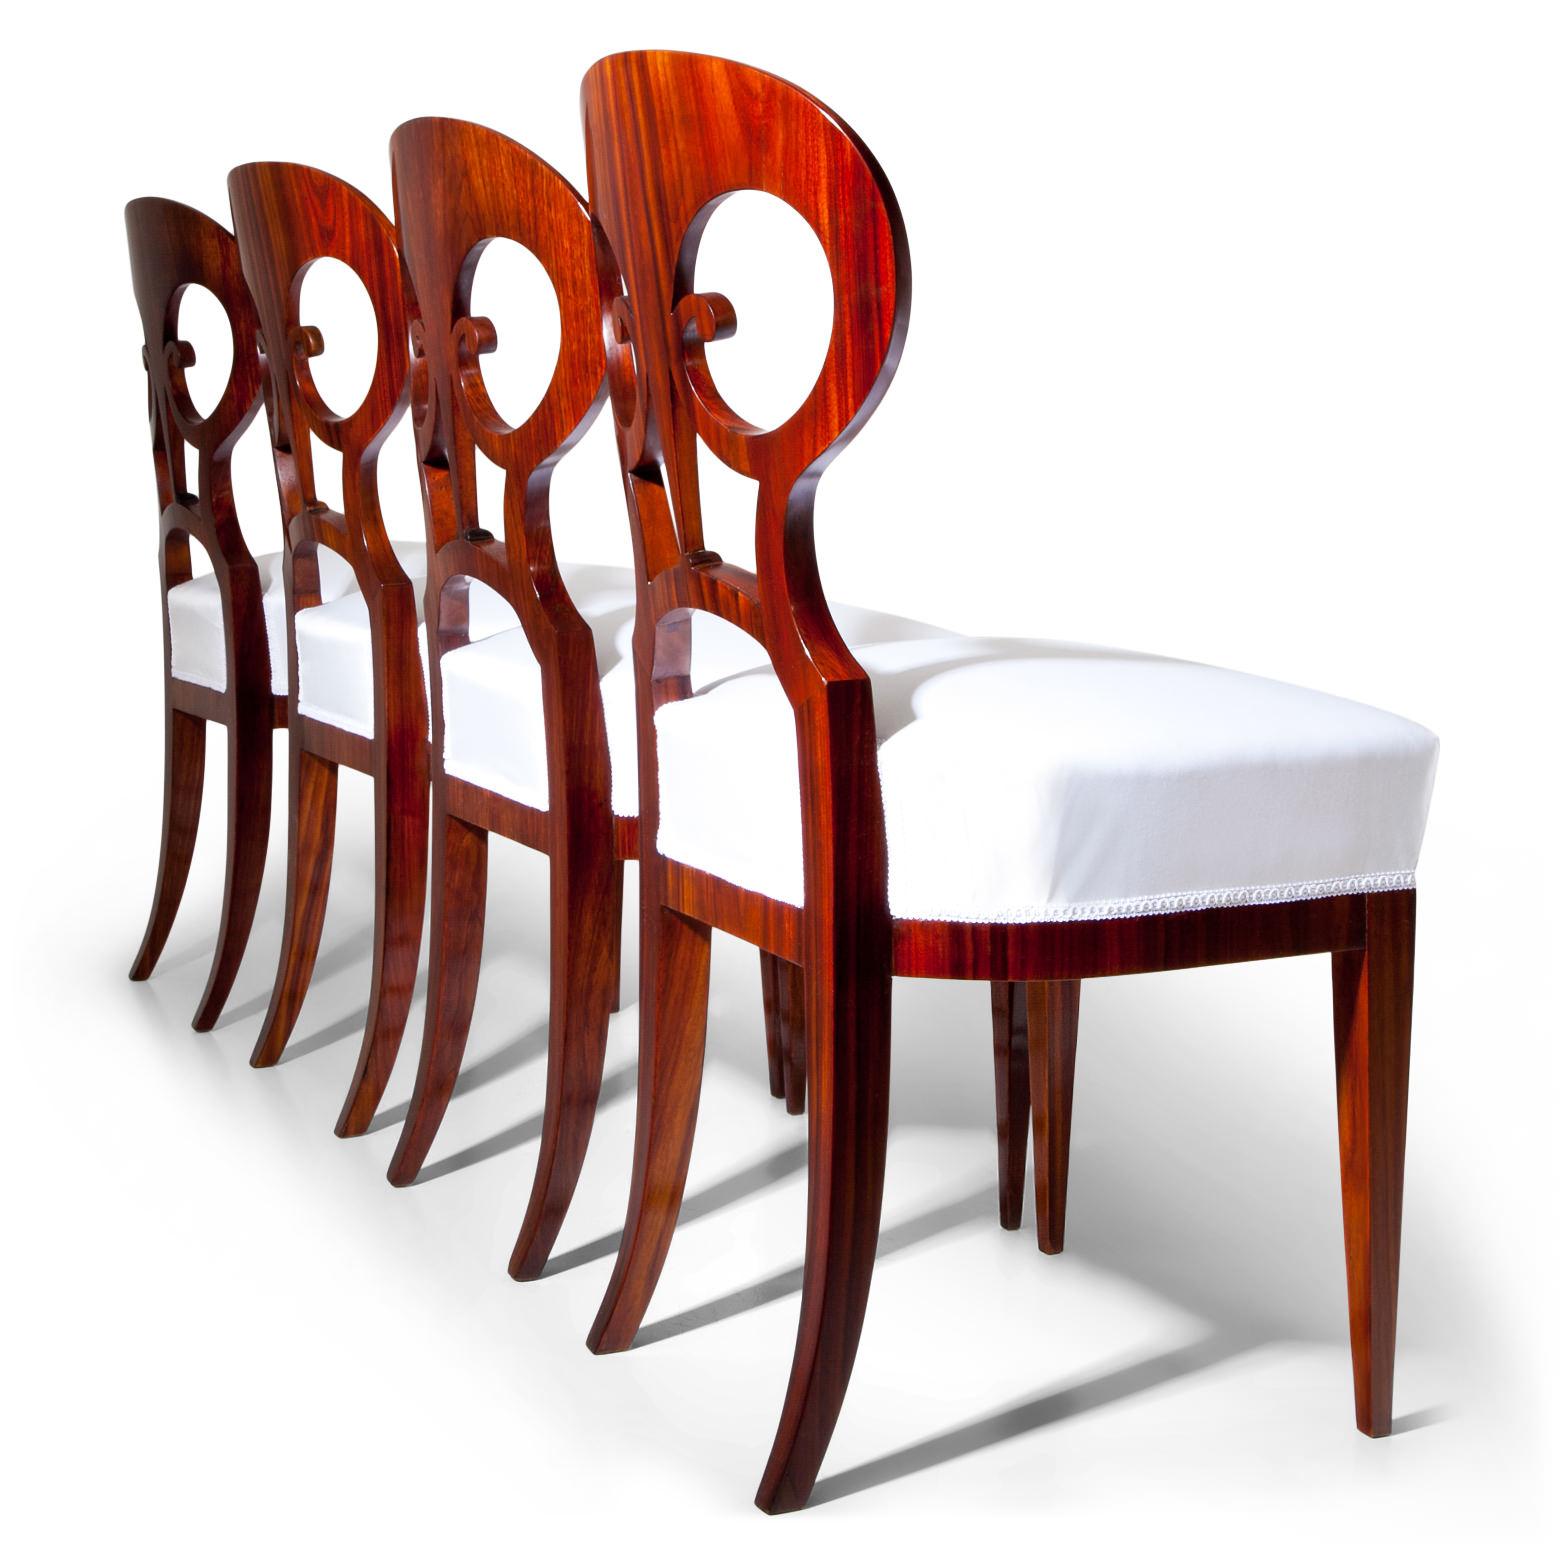 Set of six Biedermeier chairs out of mahogany, standing on tapered legs. The pretzel-shaped backrests show ebonized thread inlays. The seats were reupholstered with a white fabric.